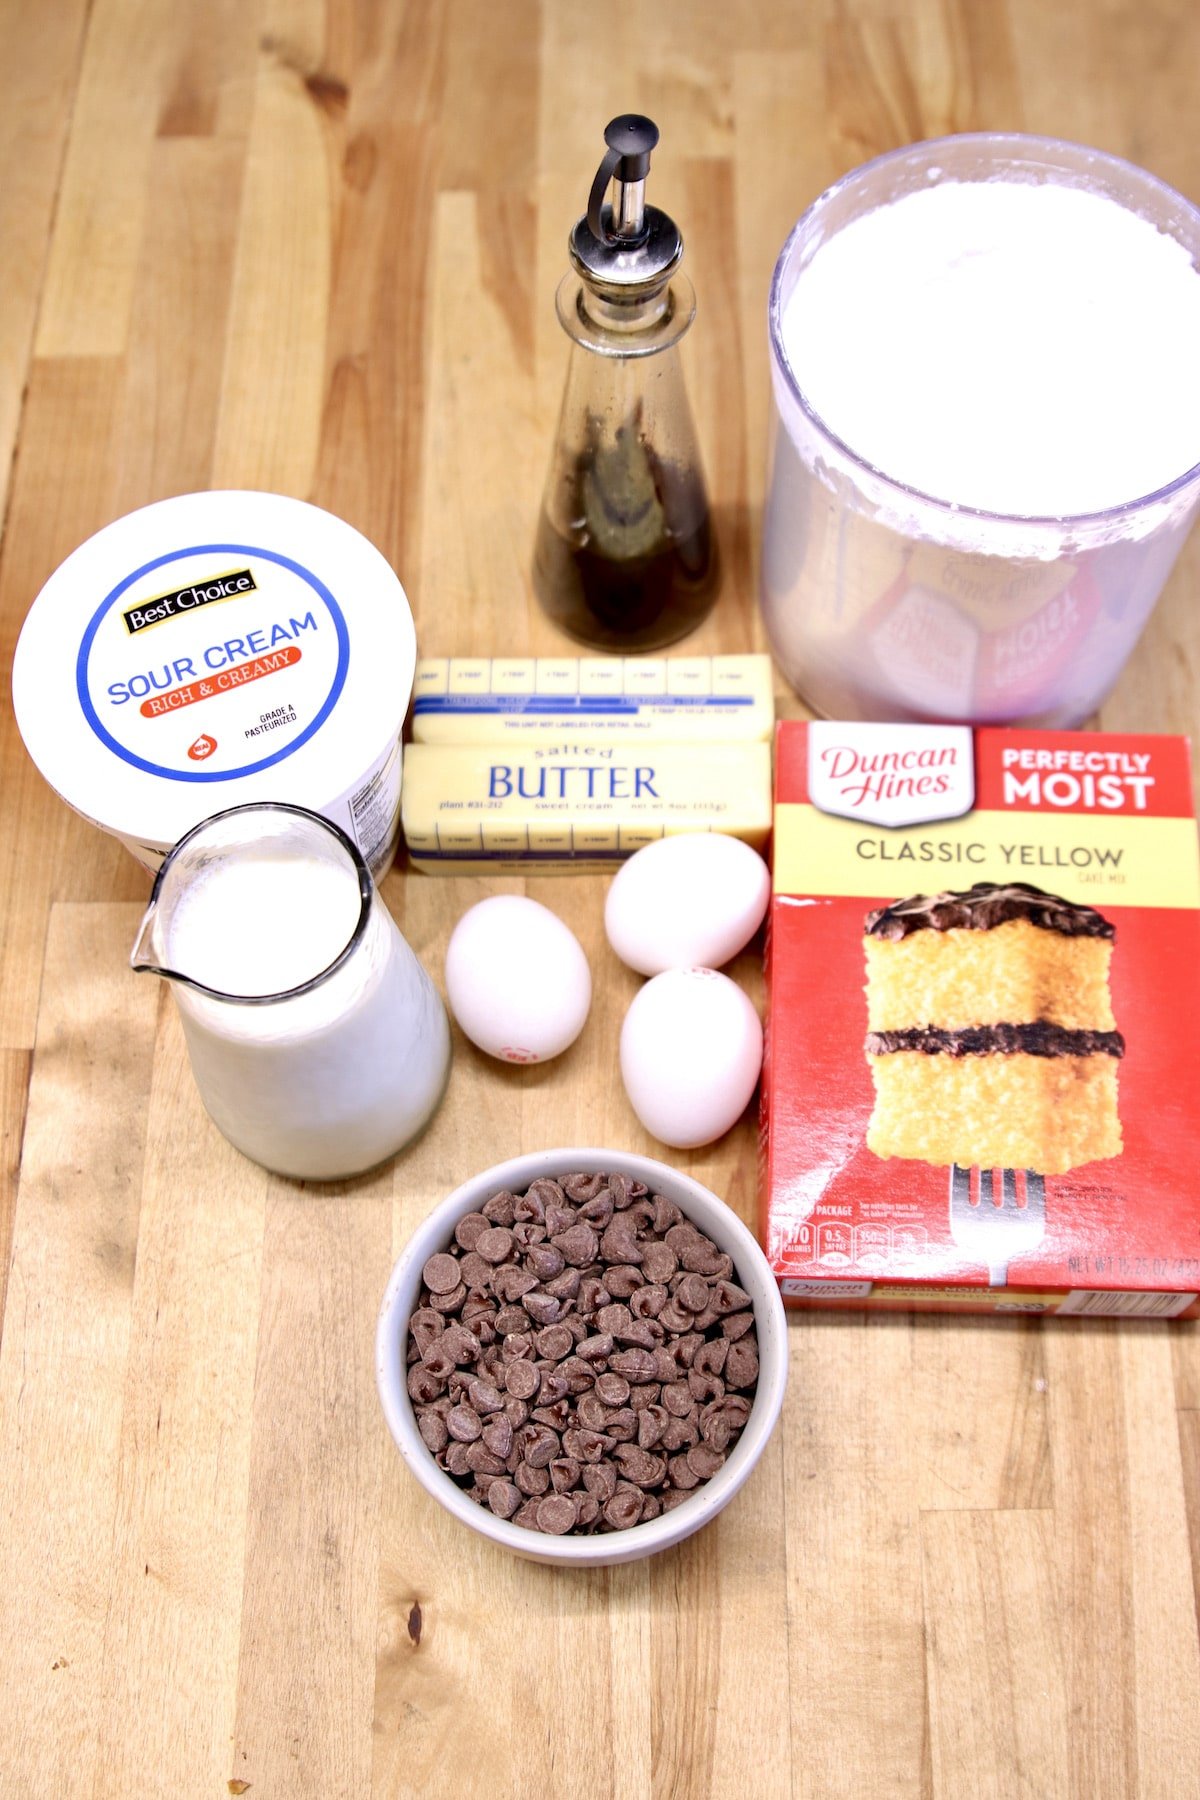 Ingredients for Marble Sheet Cake and Chocolate Sour Cream Frosting